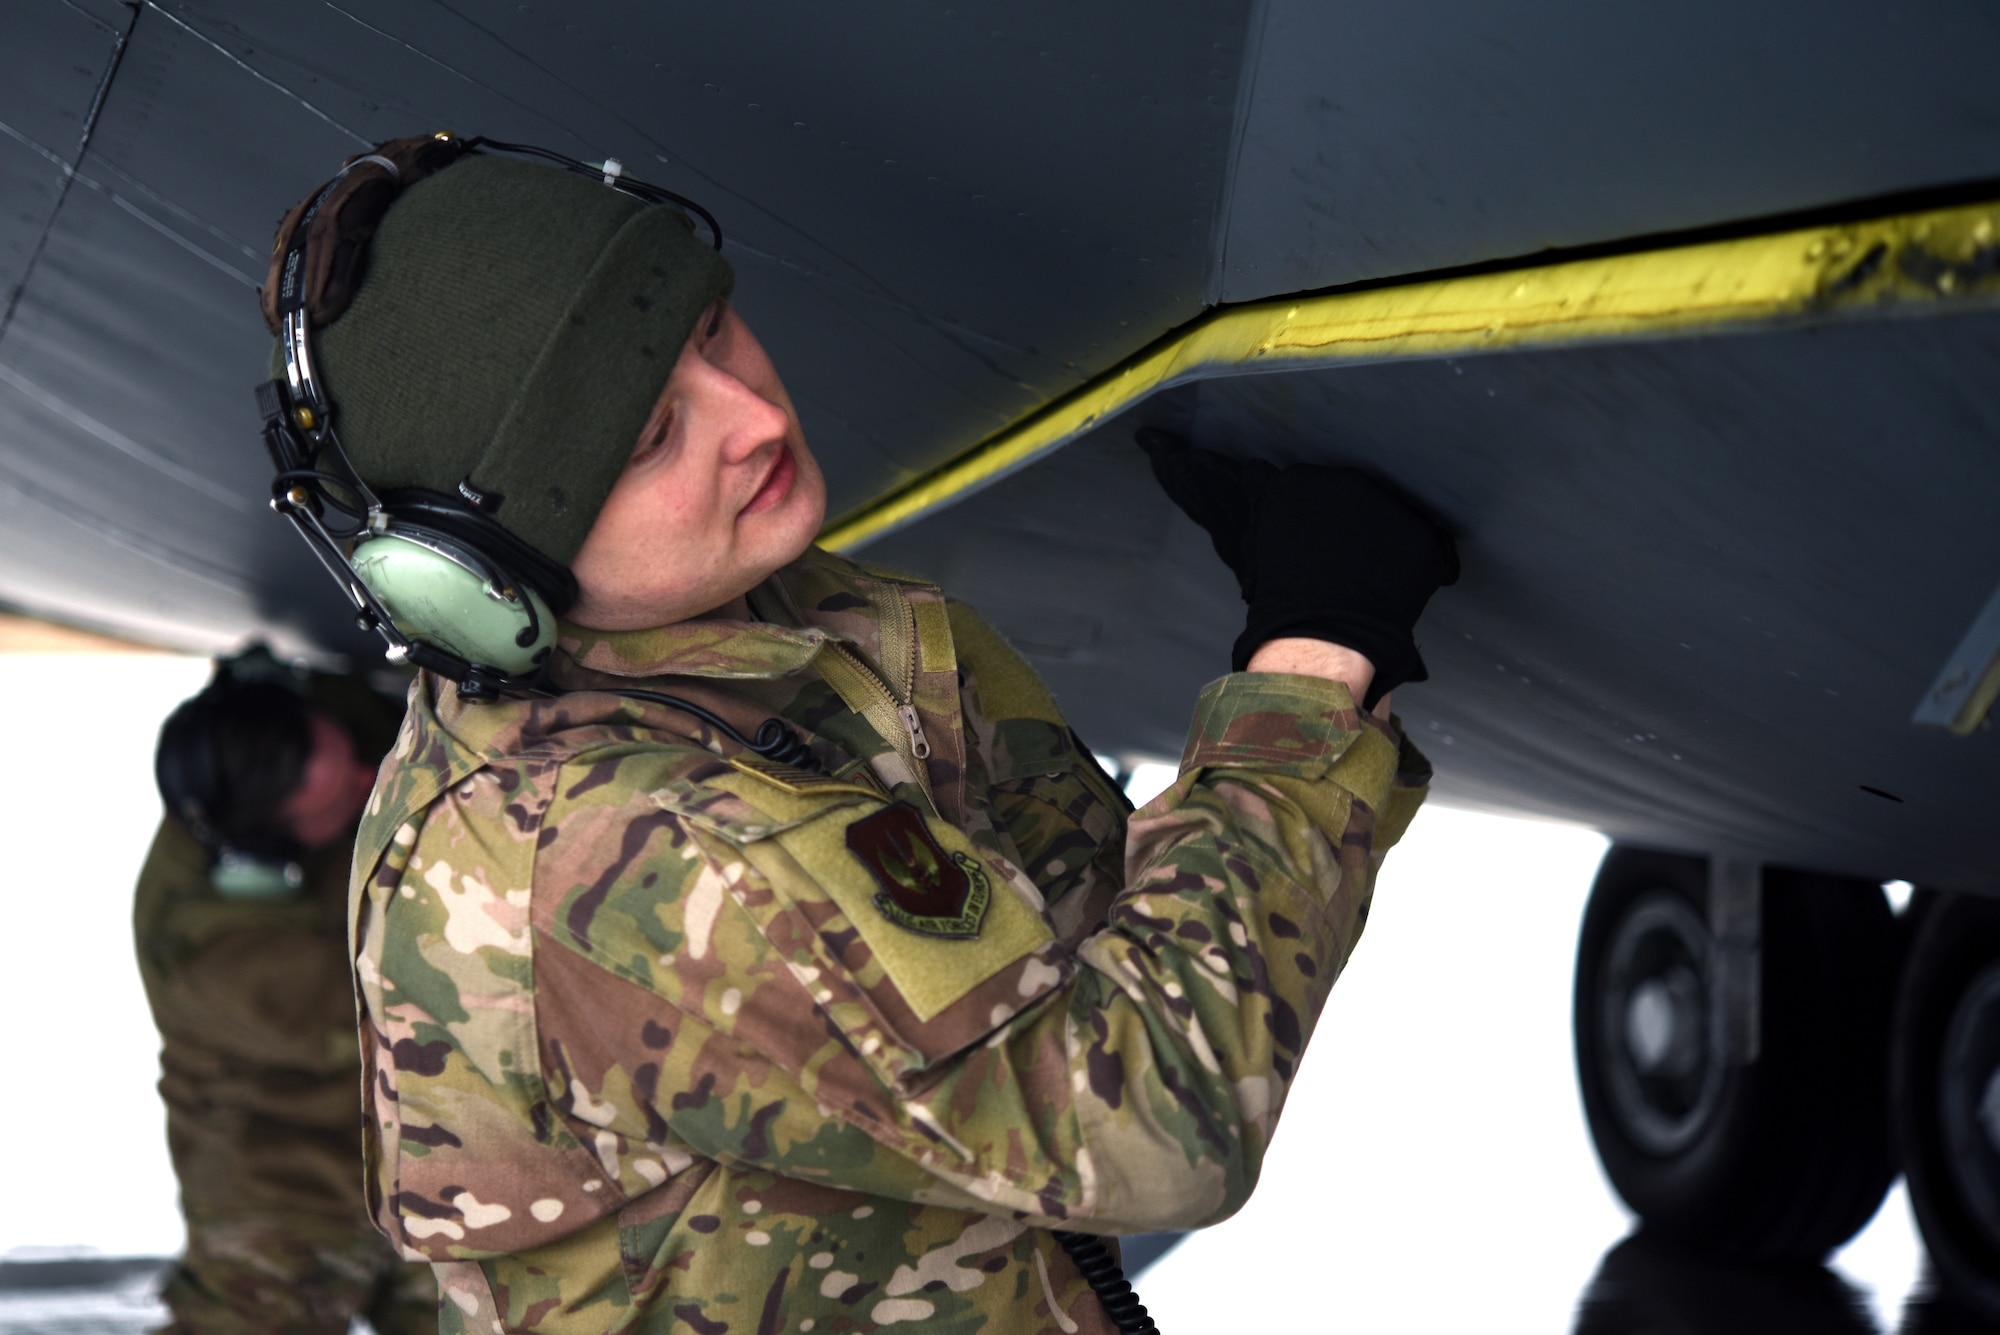 U.S. Air Force Staff Sgt. Shannon Nations, 100th Aircraft Maintenance Squadron flying crew chief, preps a KC-135 Stratotanker from RAF Mildenhall during training with Romanian air force F-16s in Bucharest, Romania, March 12, 2019. The crew was involved in training with Romanian air force F-16s over the skies of Romania, which enhanced regional capabilities to secure air sovereignty and promote peace and security through cooperation, collaboration, interoperability with NATO allies in the region. (U.S. Air Force photo by Airman 1st Class Brandon Esau)